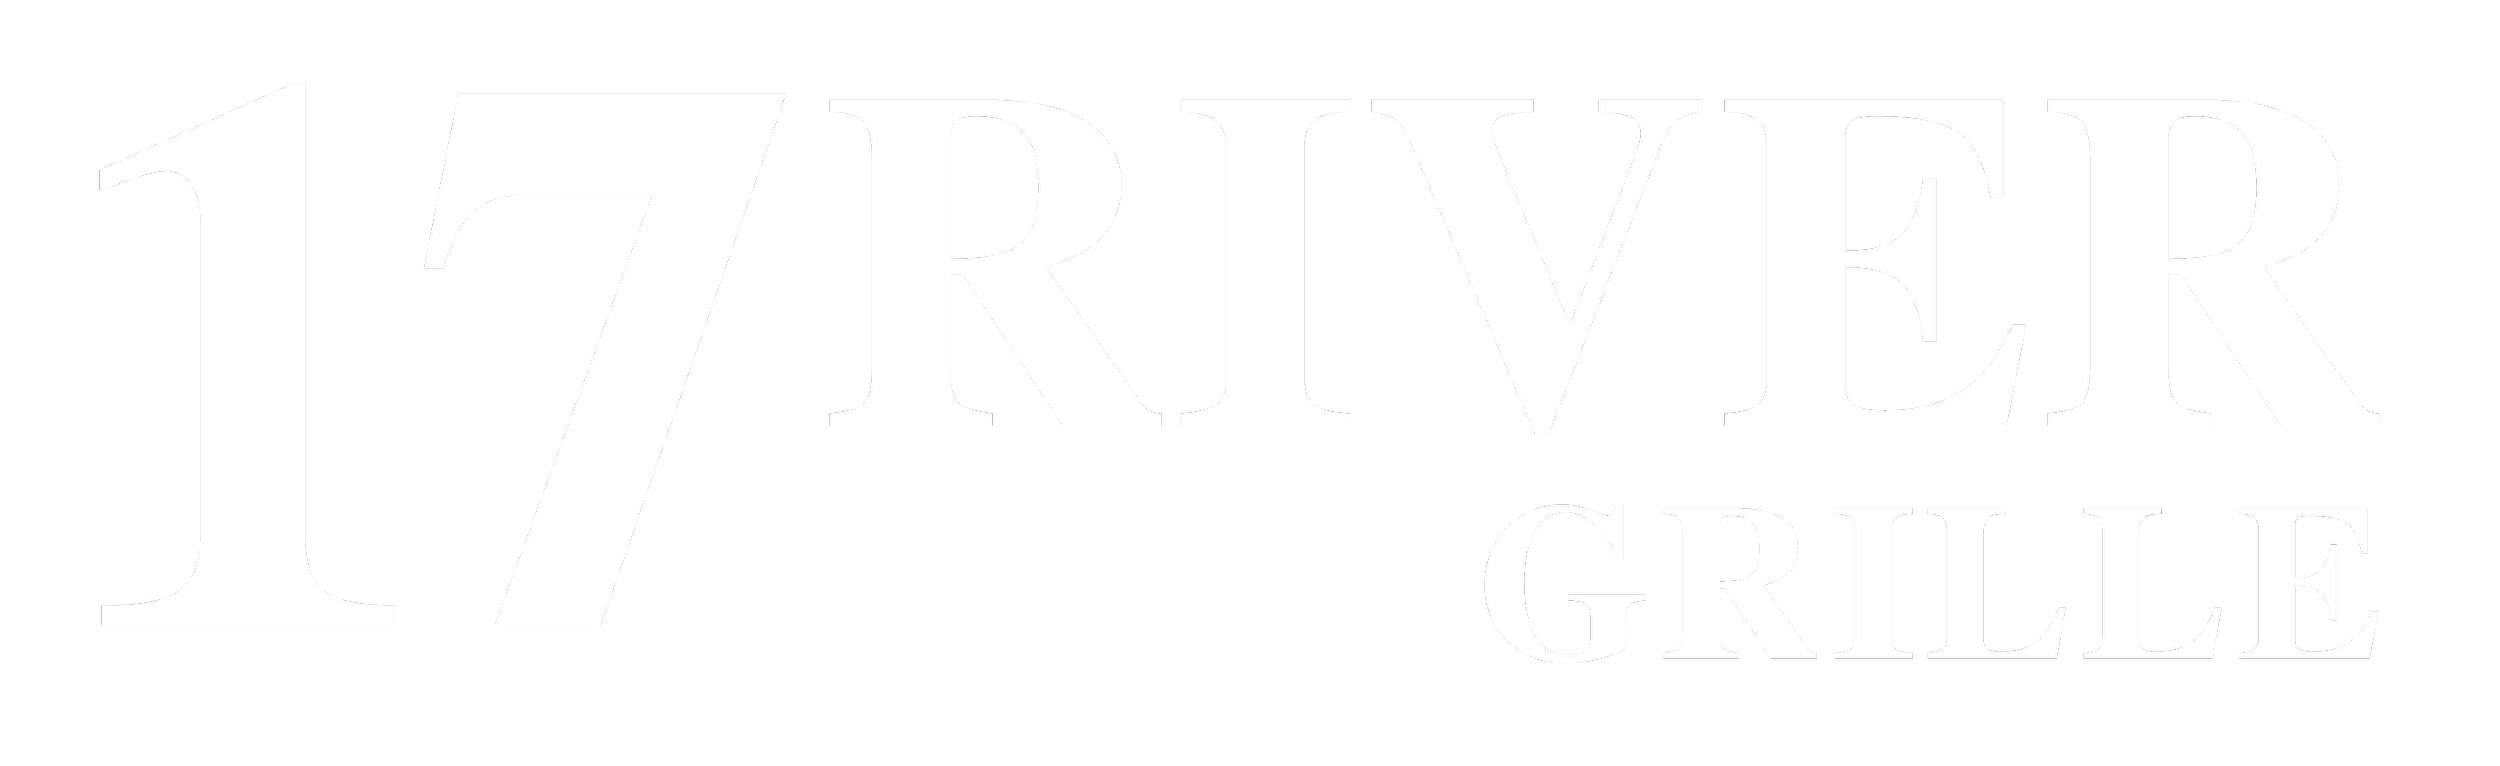 17 River Grille